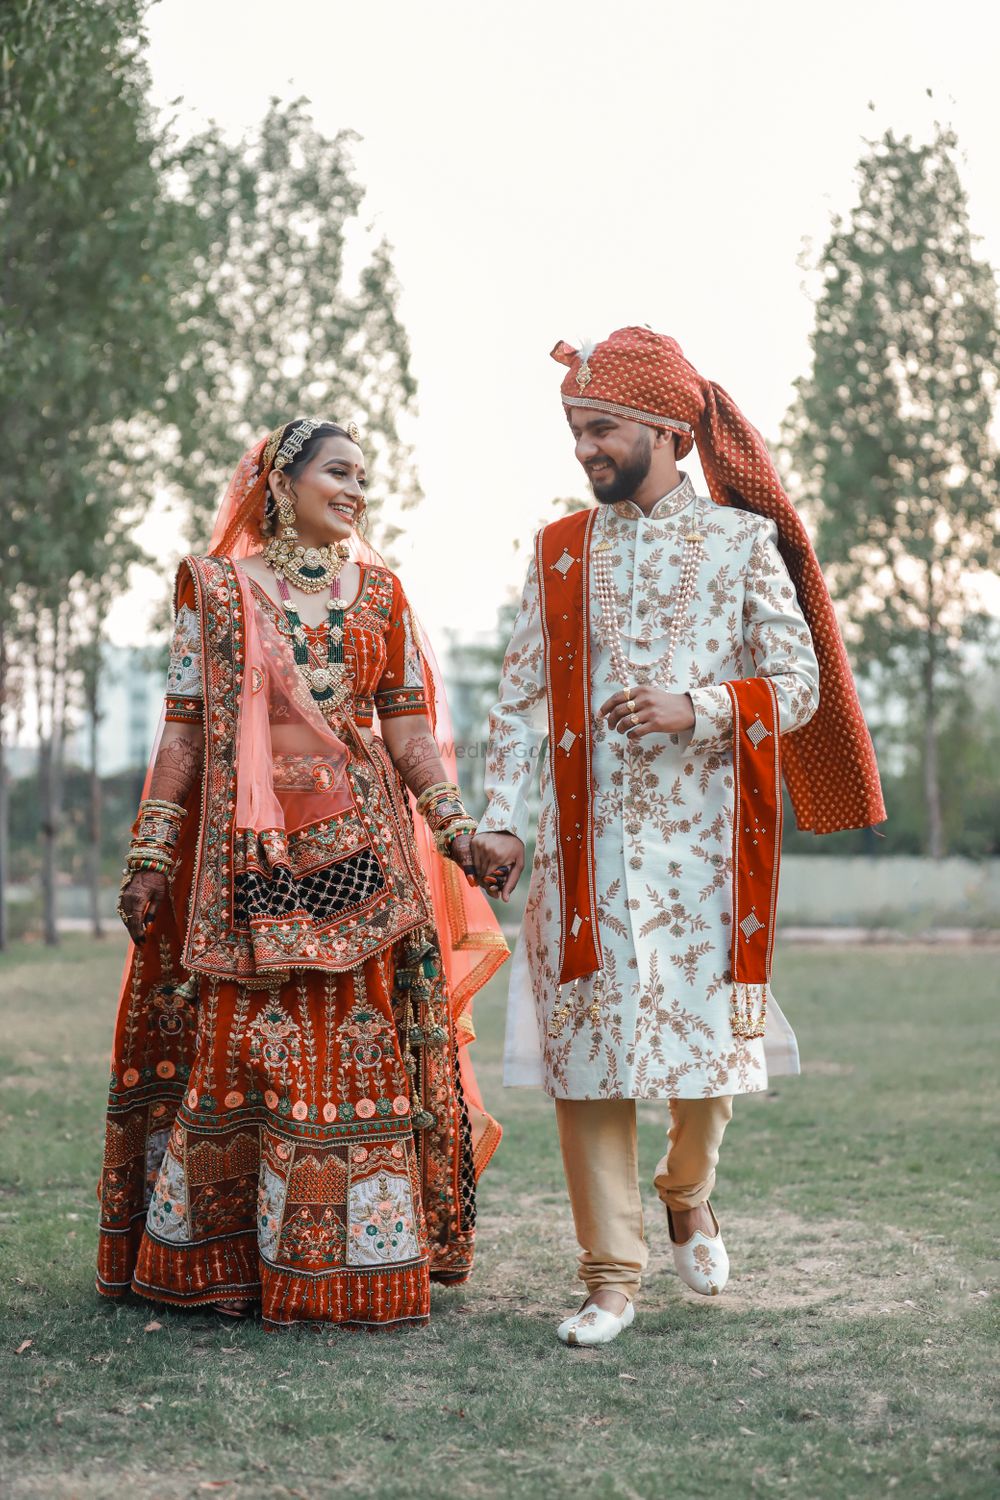 Photo From Dhaval + Nikki - By Dhaval Photography